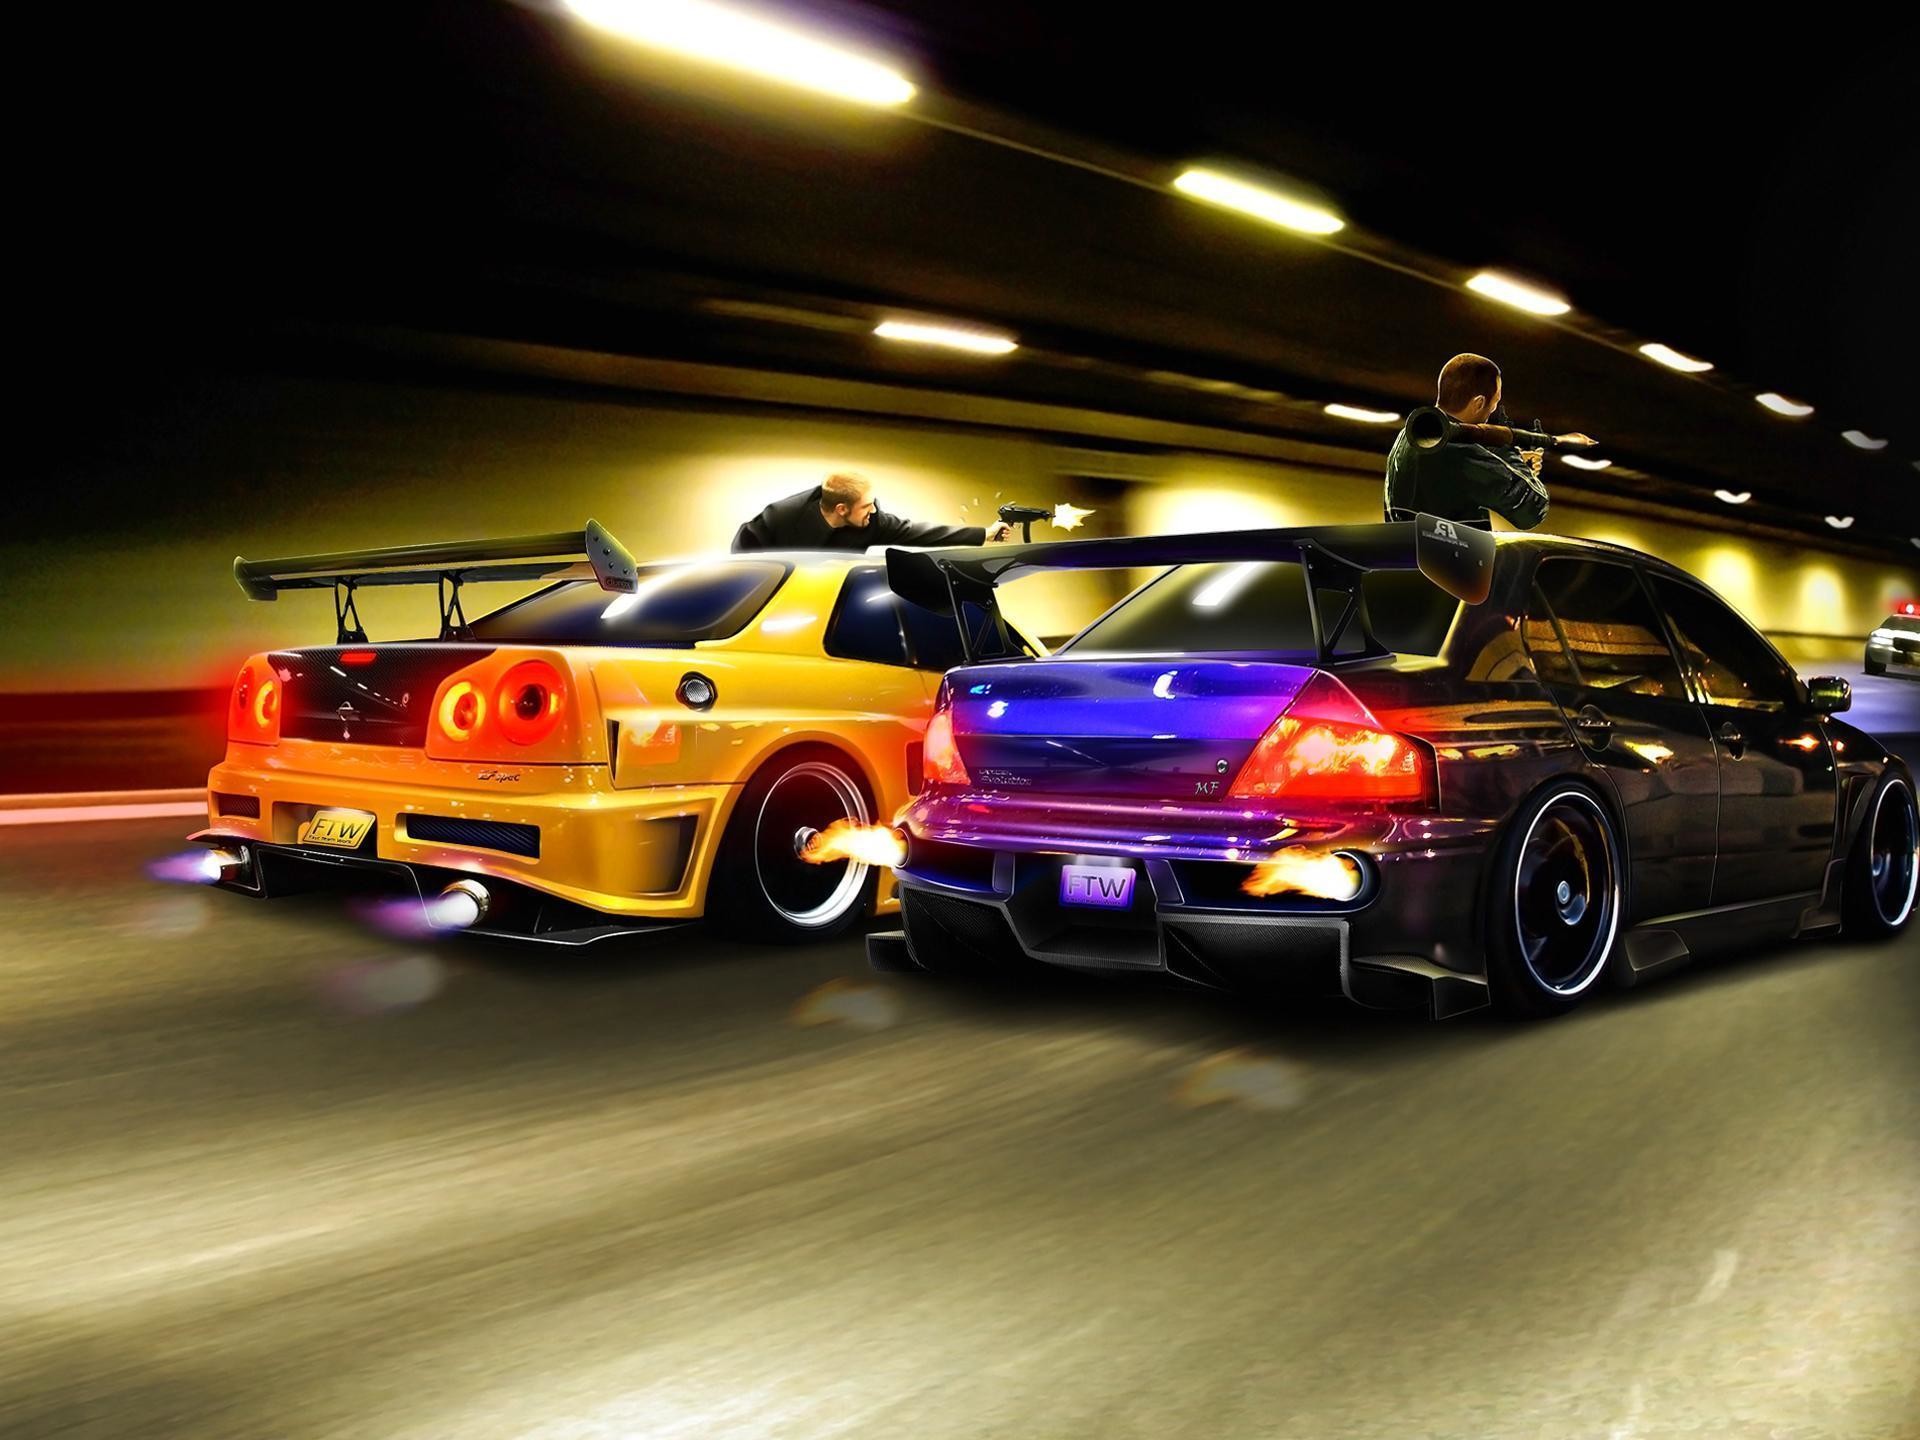 1920x1440 Wallpapers For > Street Racing Wallpapers